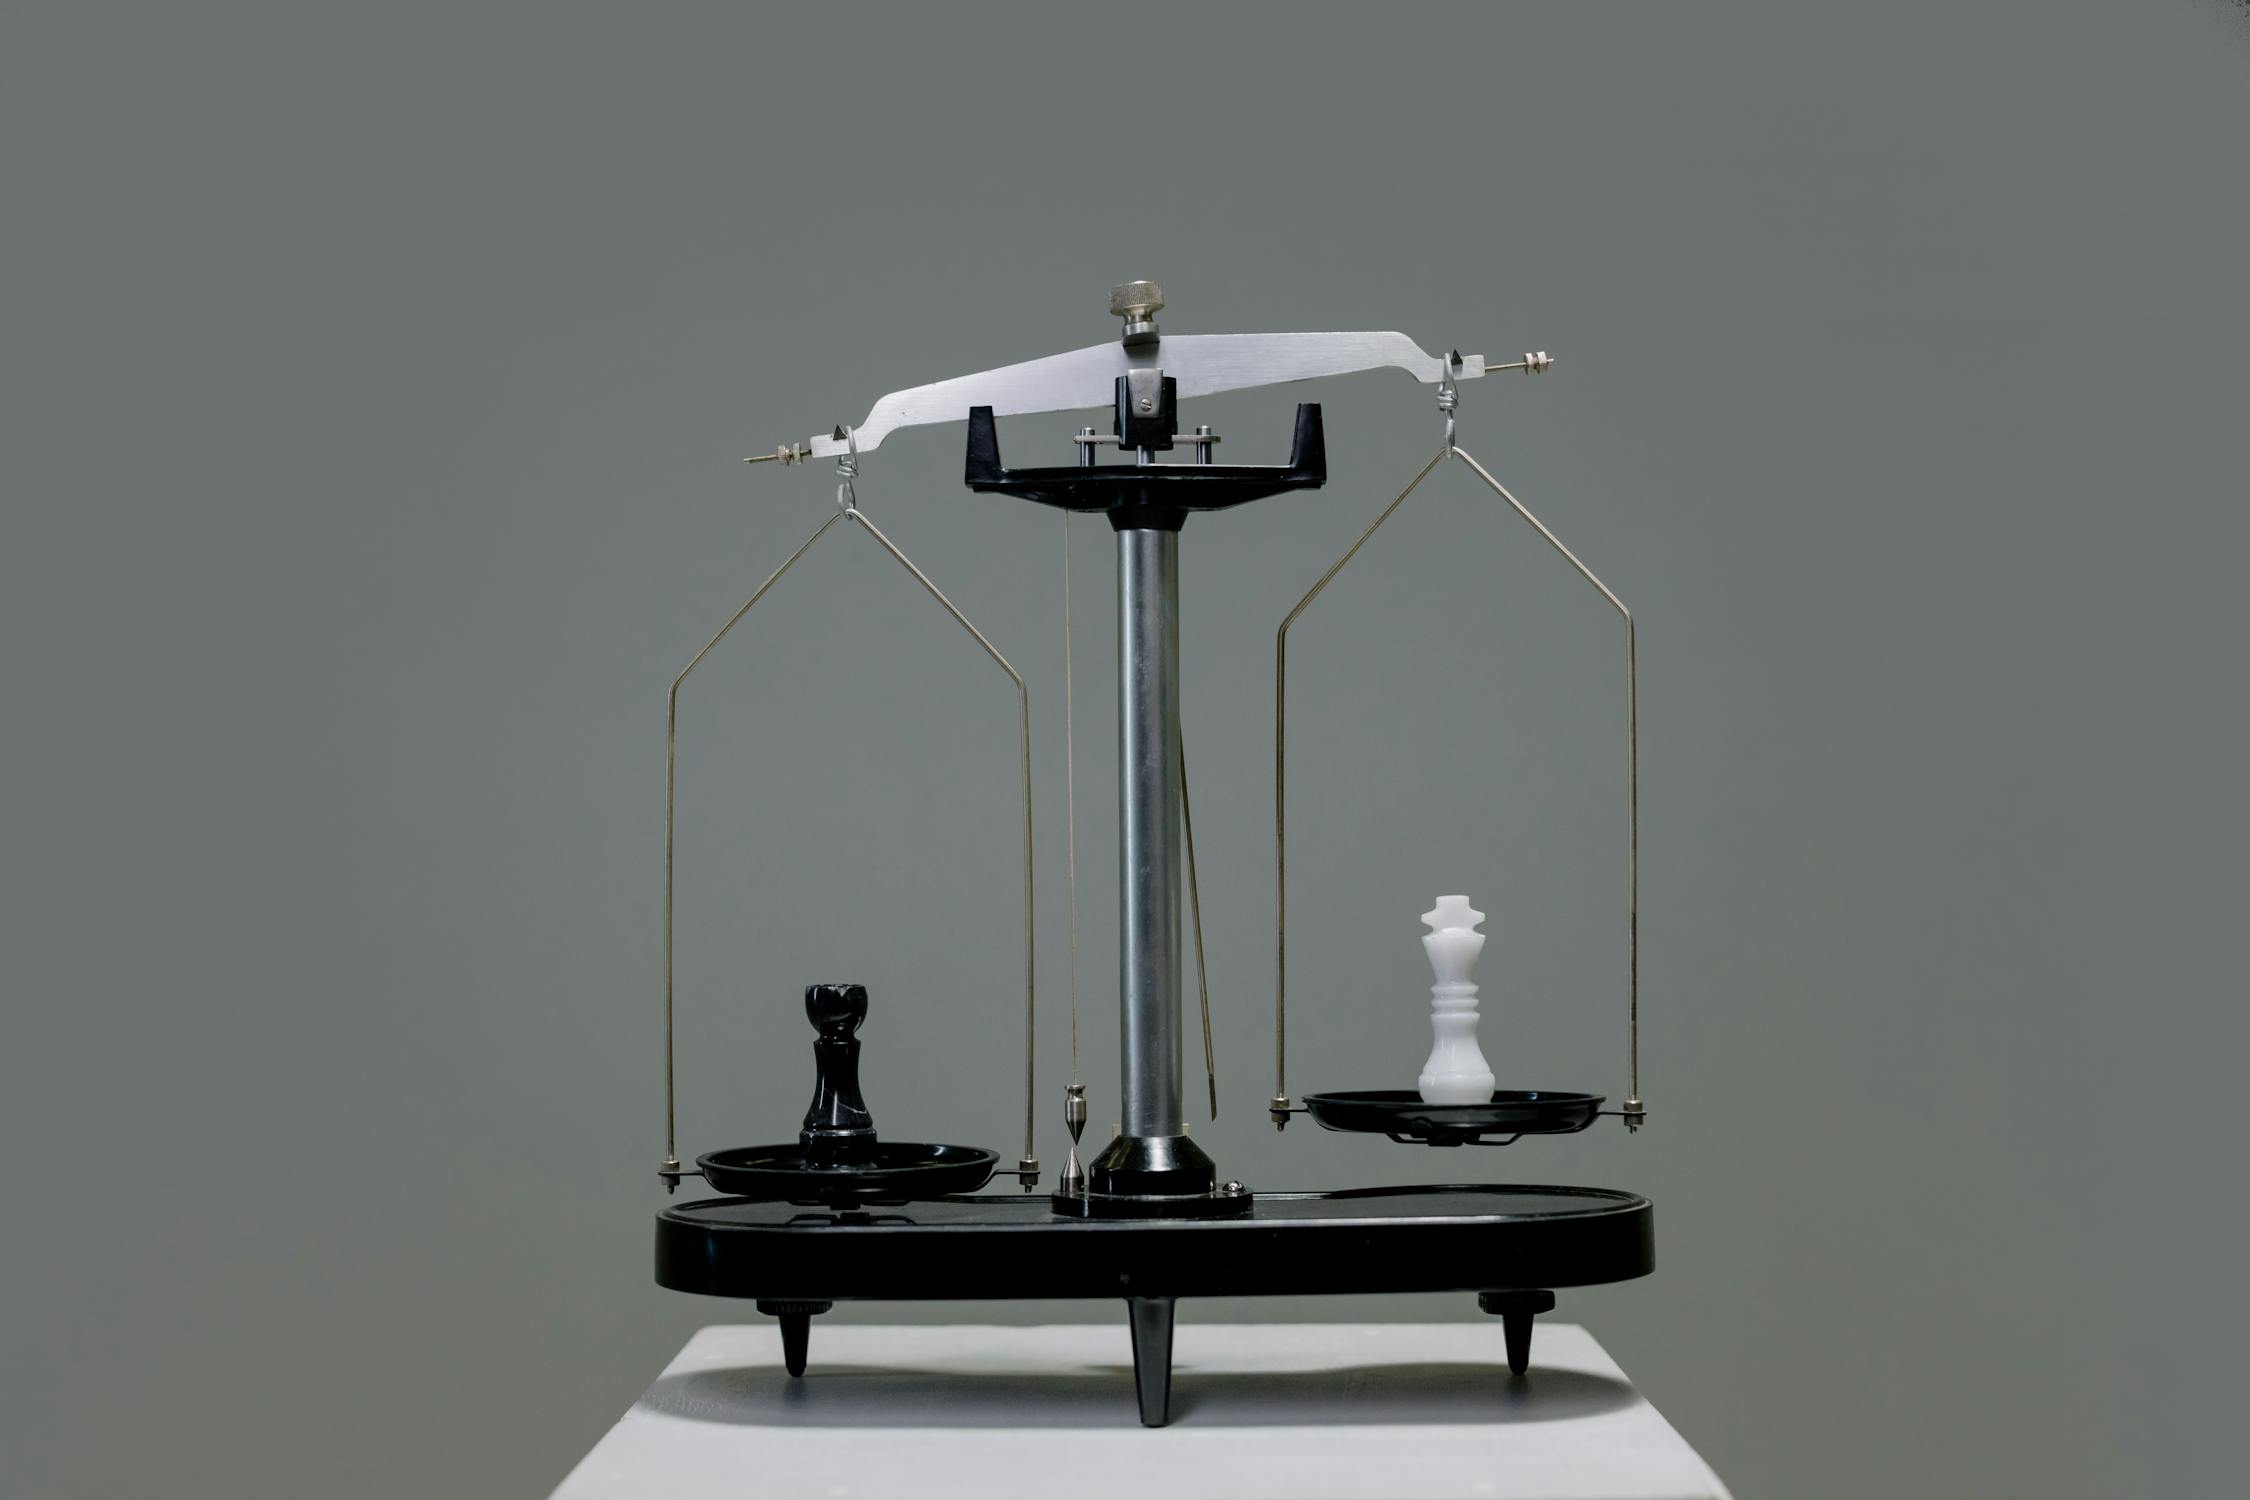 Balance scales with a black "queen" chess piece on the left and a white "king" chess piece on the right. The white "king" chess piece is higher up